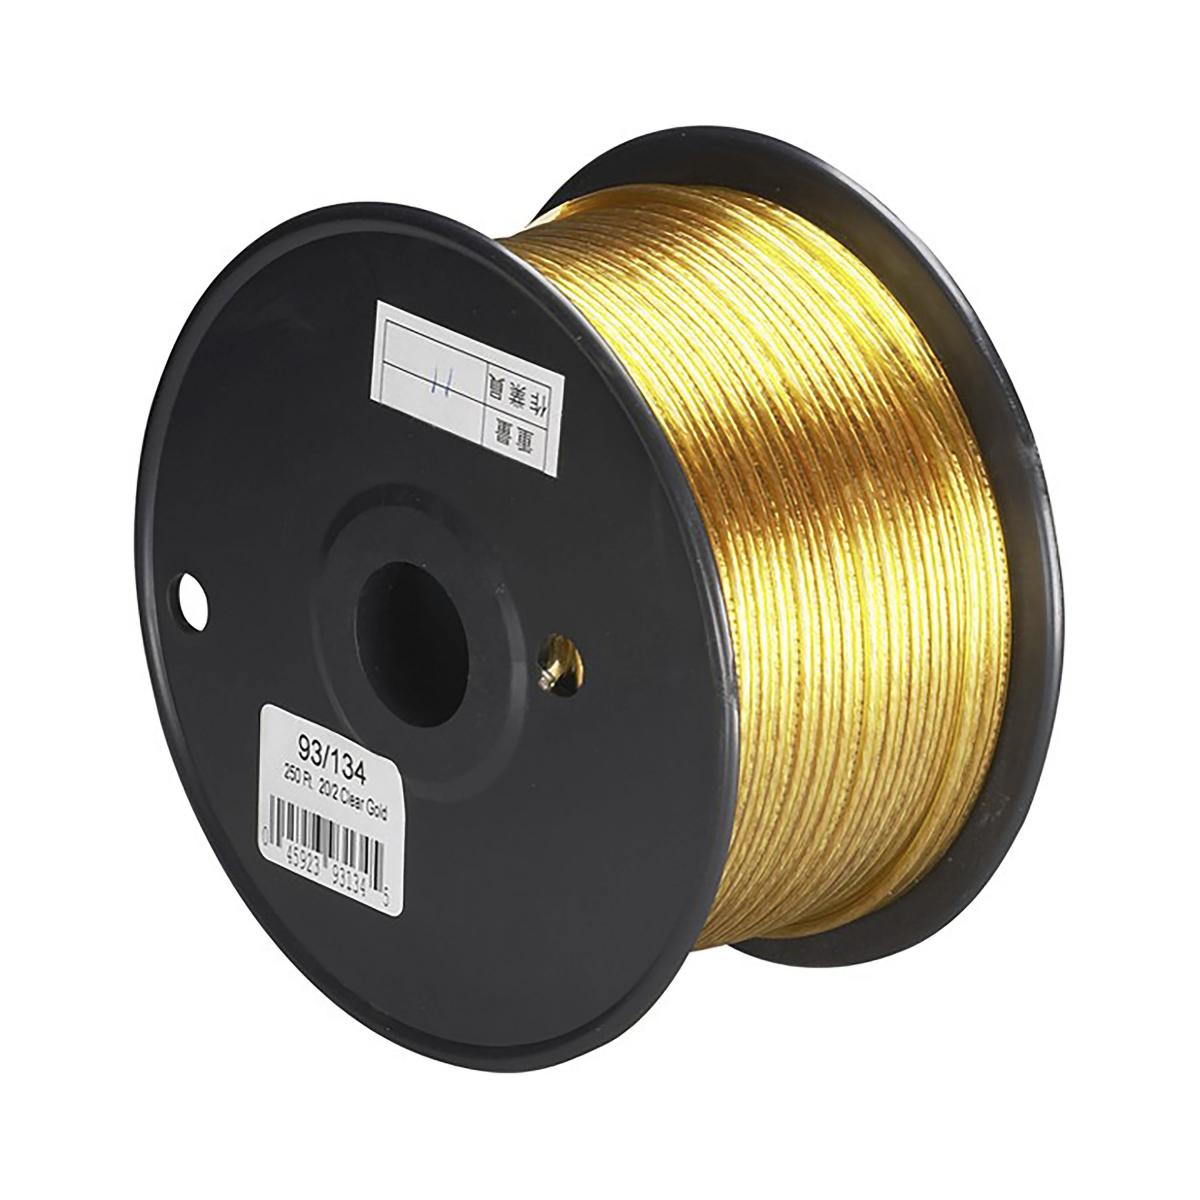 Satco 93-134 Lamp And Lighting Bulk Wire 20/2 SPT-1 105C Wire 250 Foot/Spool Clear Gold